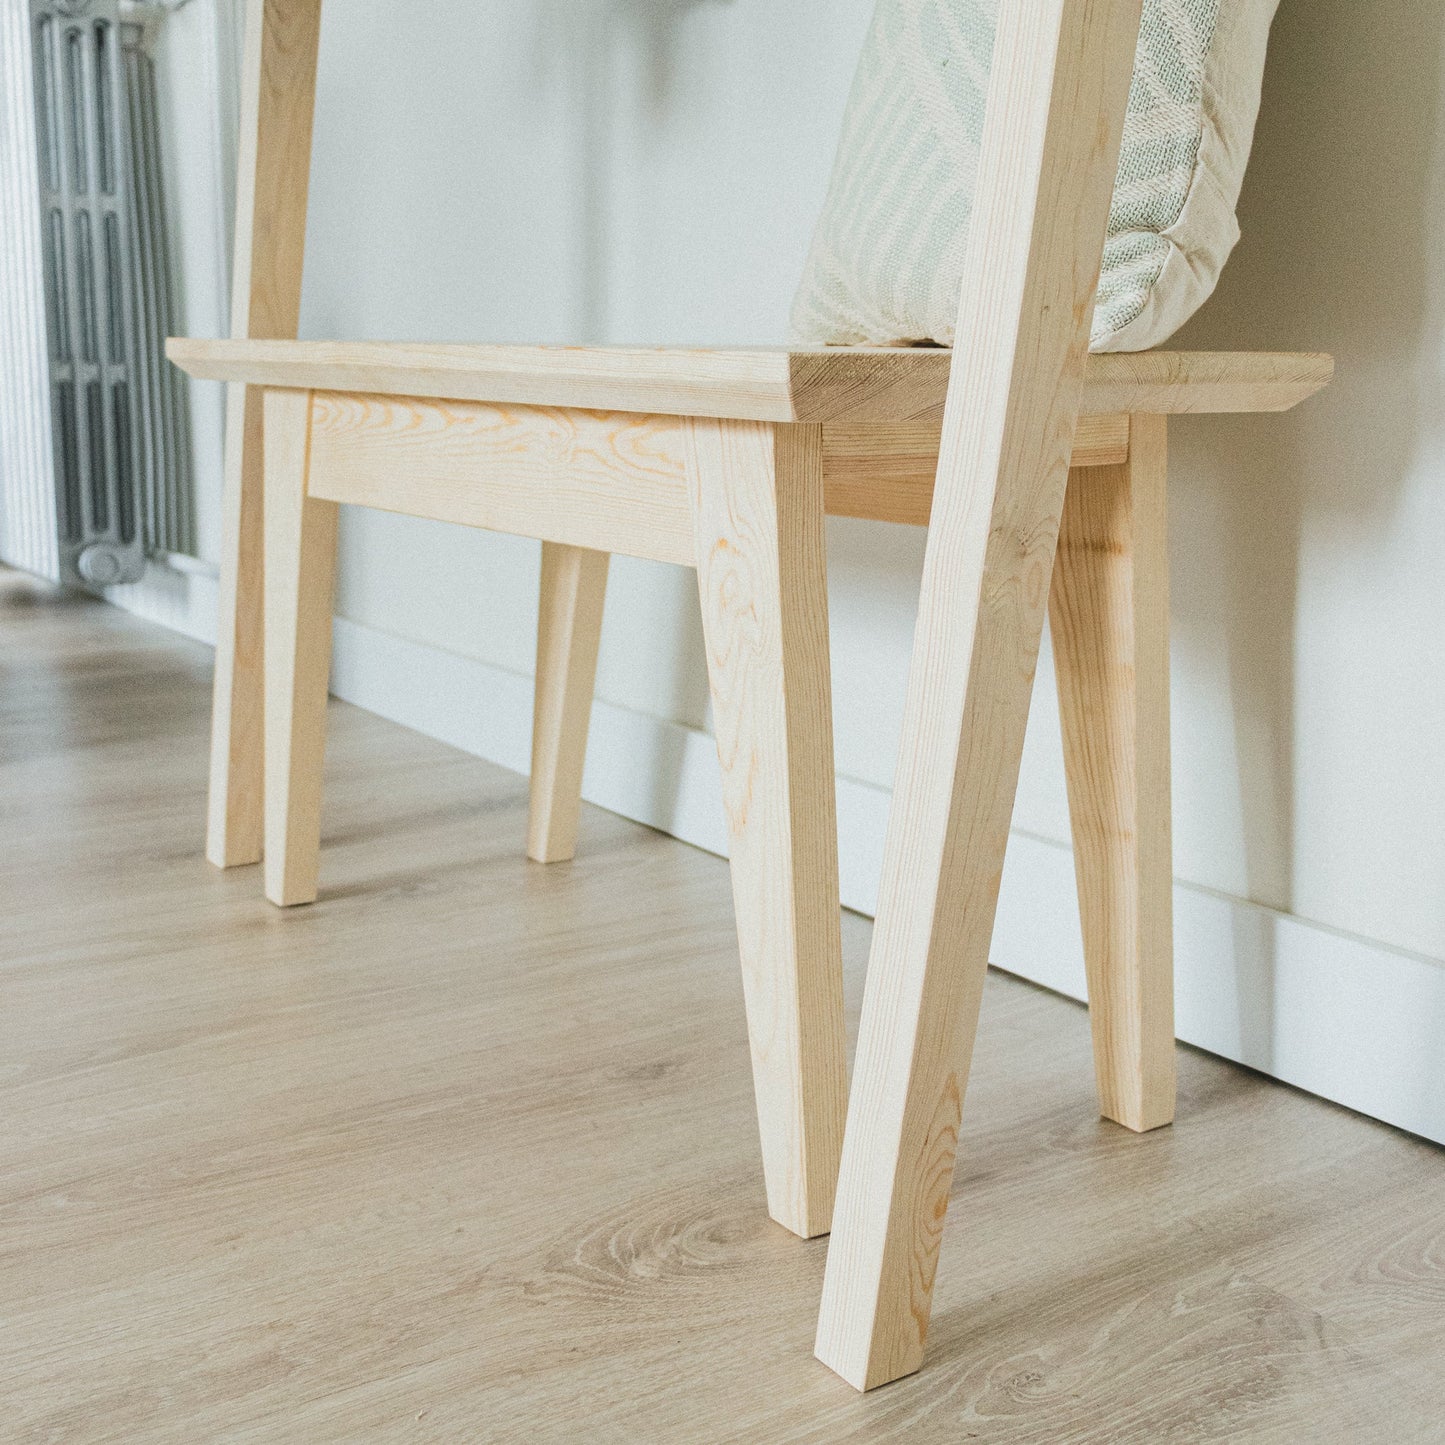 Wooden bench | small hall bench 